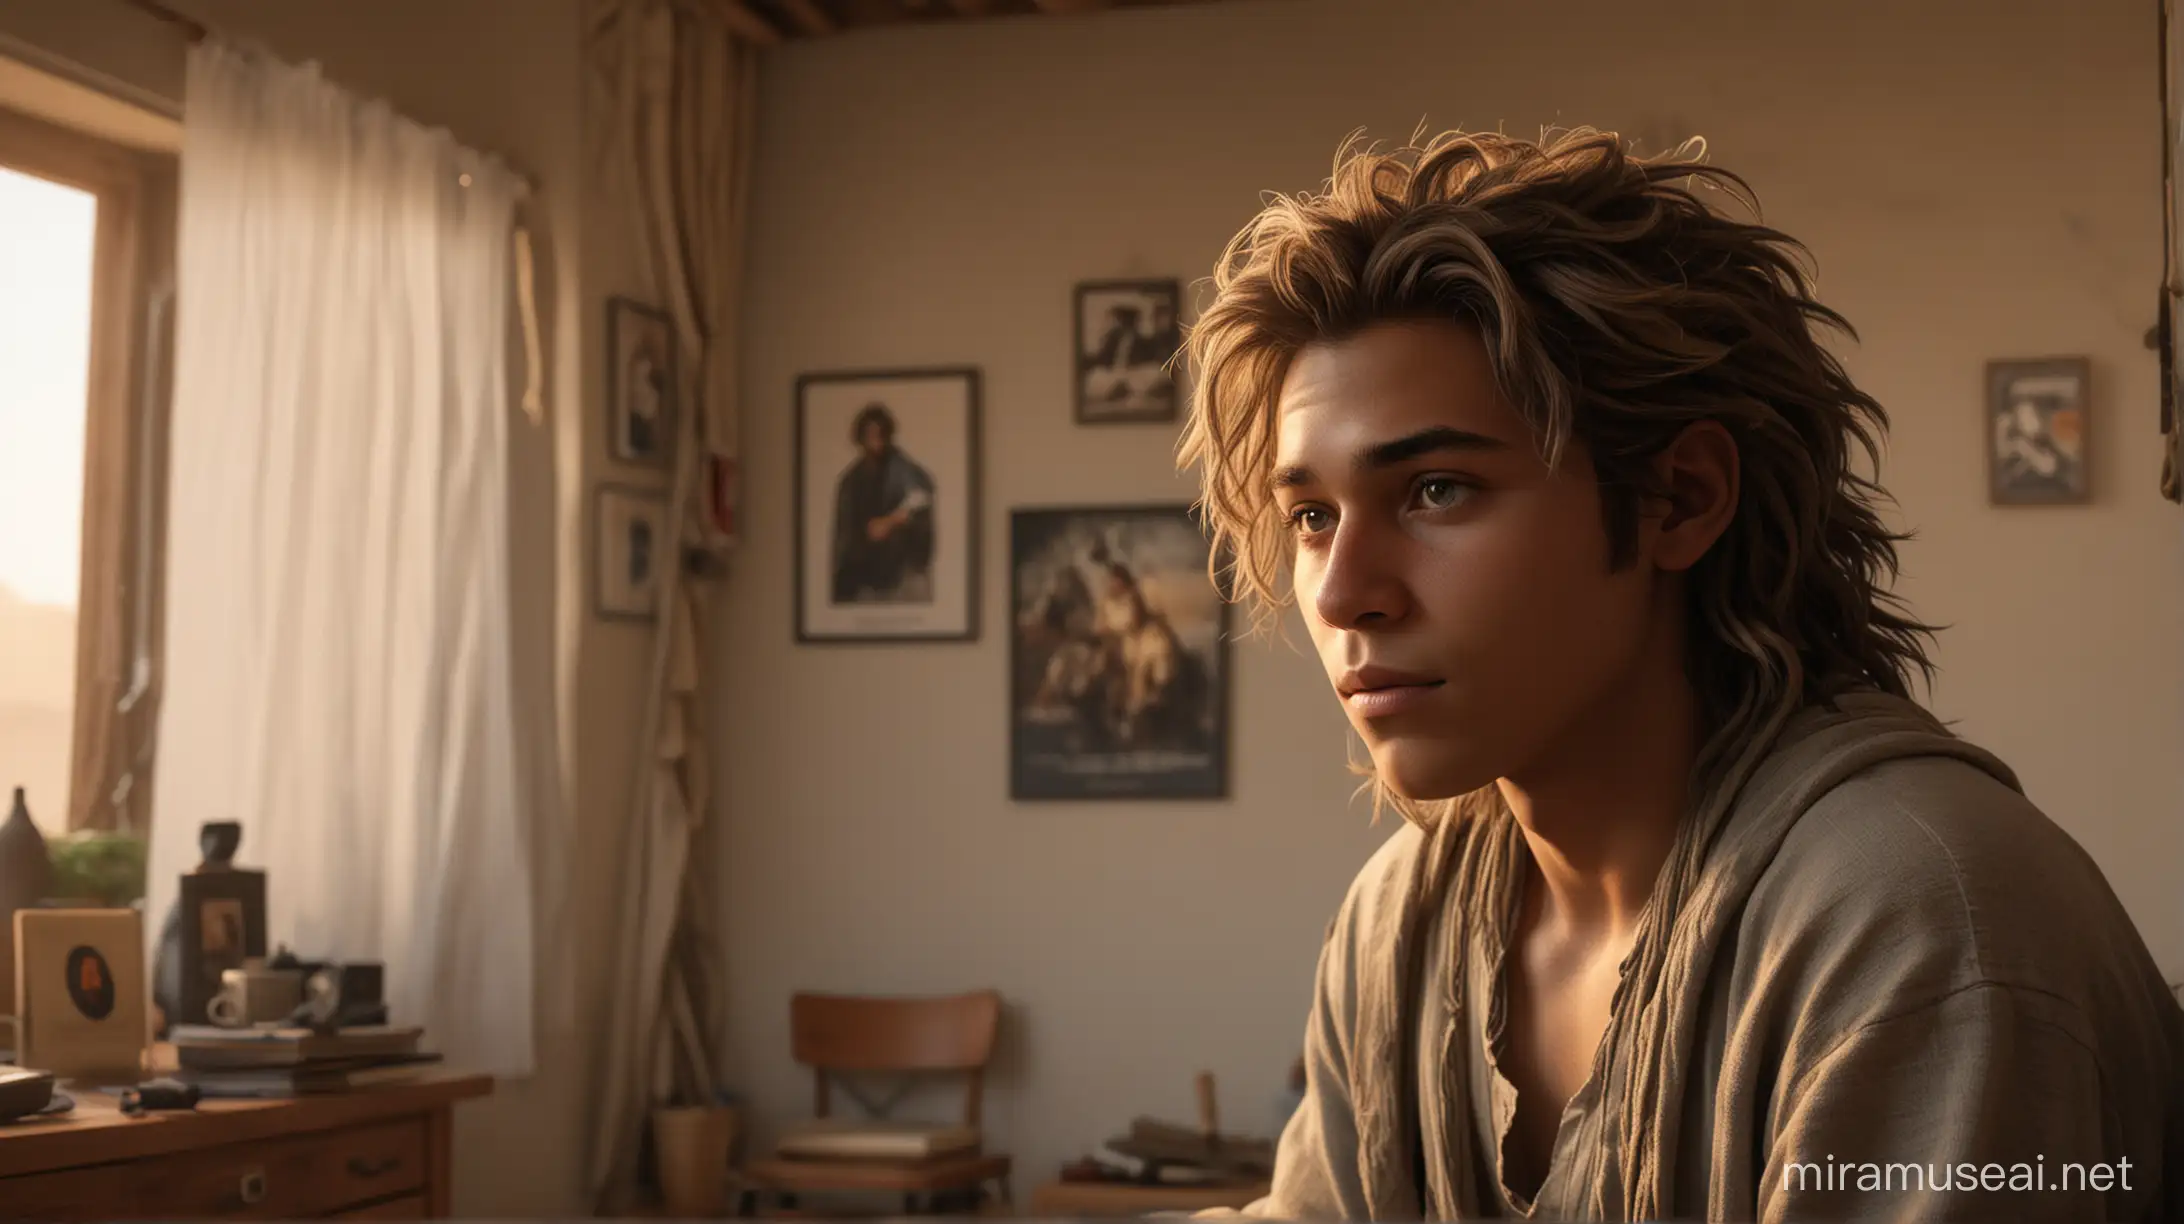 /imagine prompt: realistic, personality: [AJANI, a 17-year-old boy with hopeful eyes, waking up in a humble home at sunrise. There’s a gentle tiredness in his face, but his eyes glint with determination as he gazes at a makeshift poster of a famous musician on his wall]unreal engine, hyper real --q 2 --v 5.2 --ar 16:9